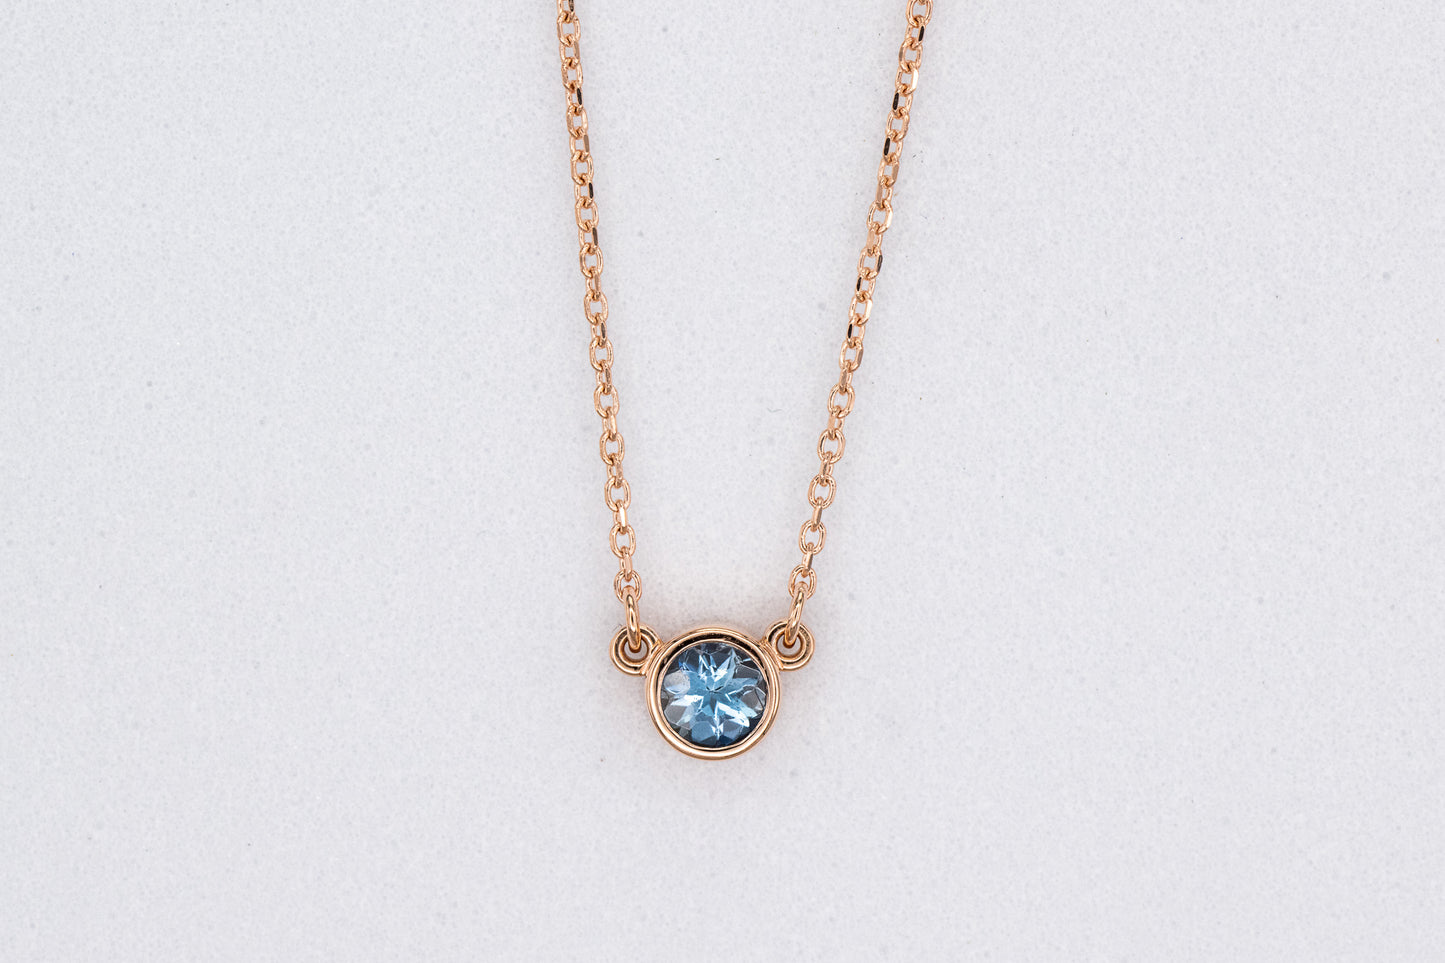 Handmade Aquamarine Rose Gold Necklace by Cassin Jewelry.